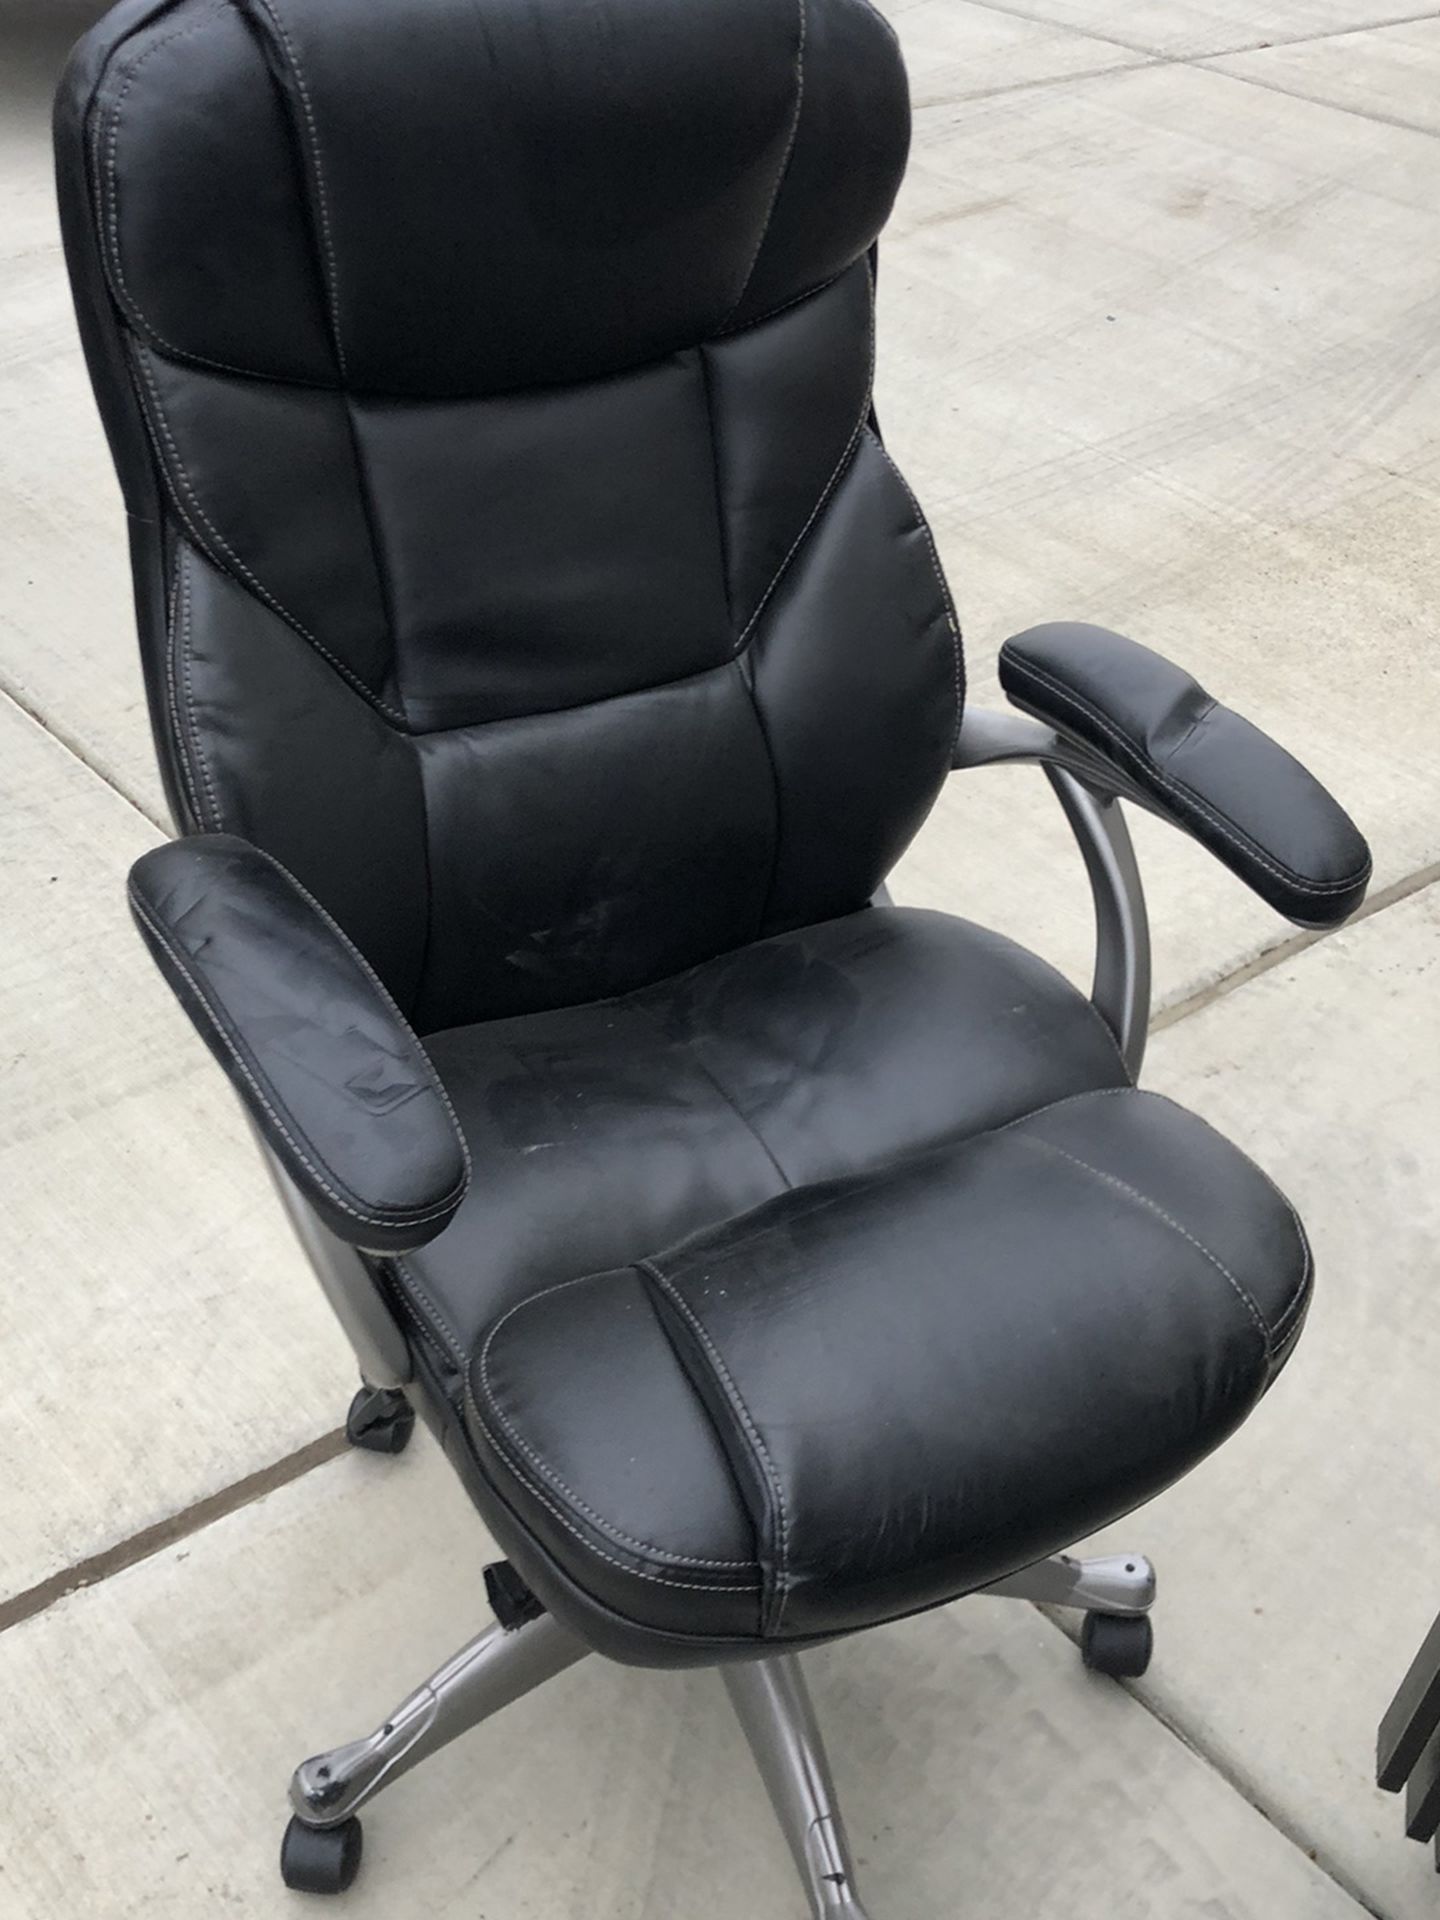 Executive Chair and Office Chair $20 Each